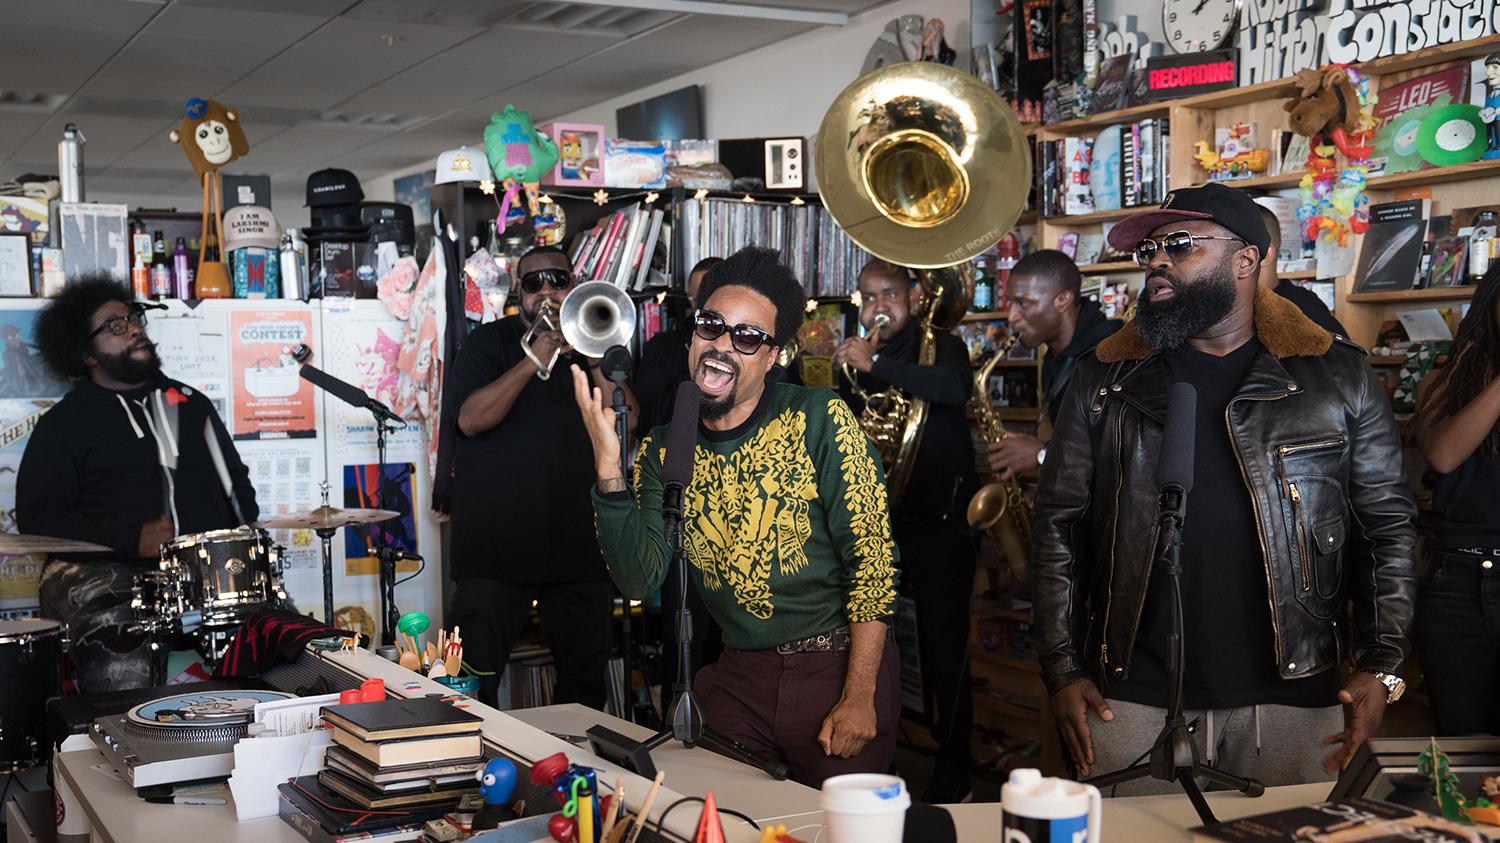 Gather Round Tight As The Roots Rock Npr Music S Tiny Desk With